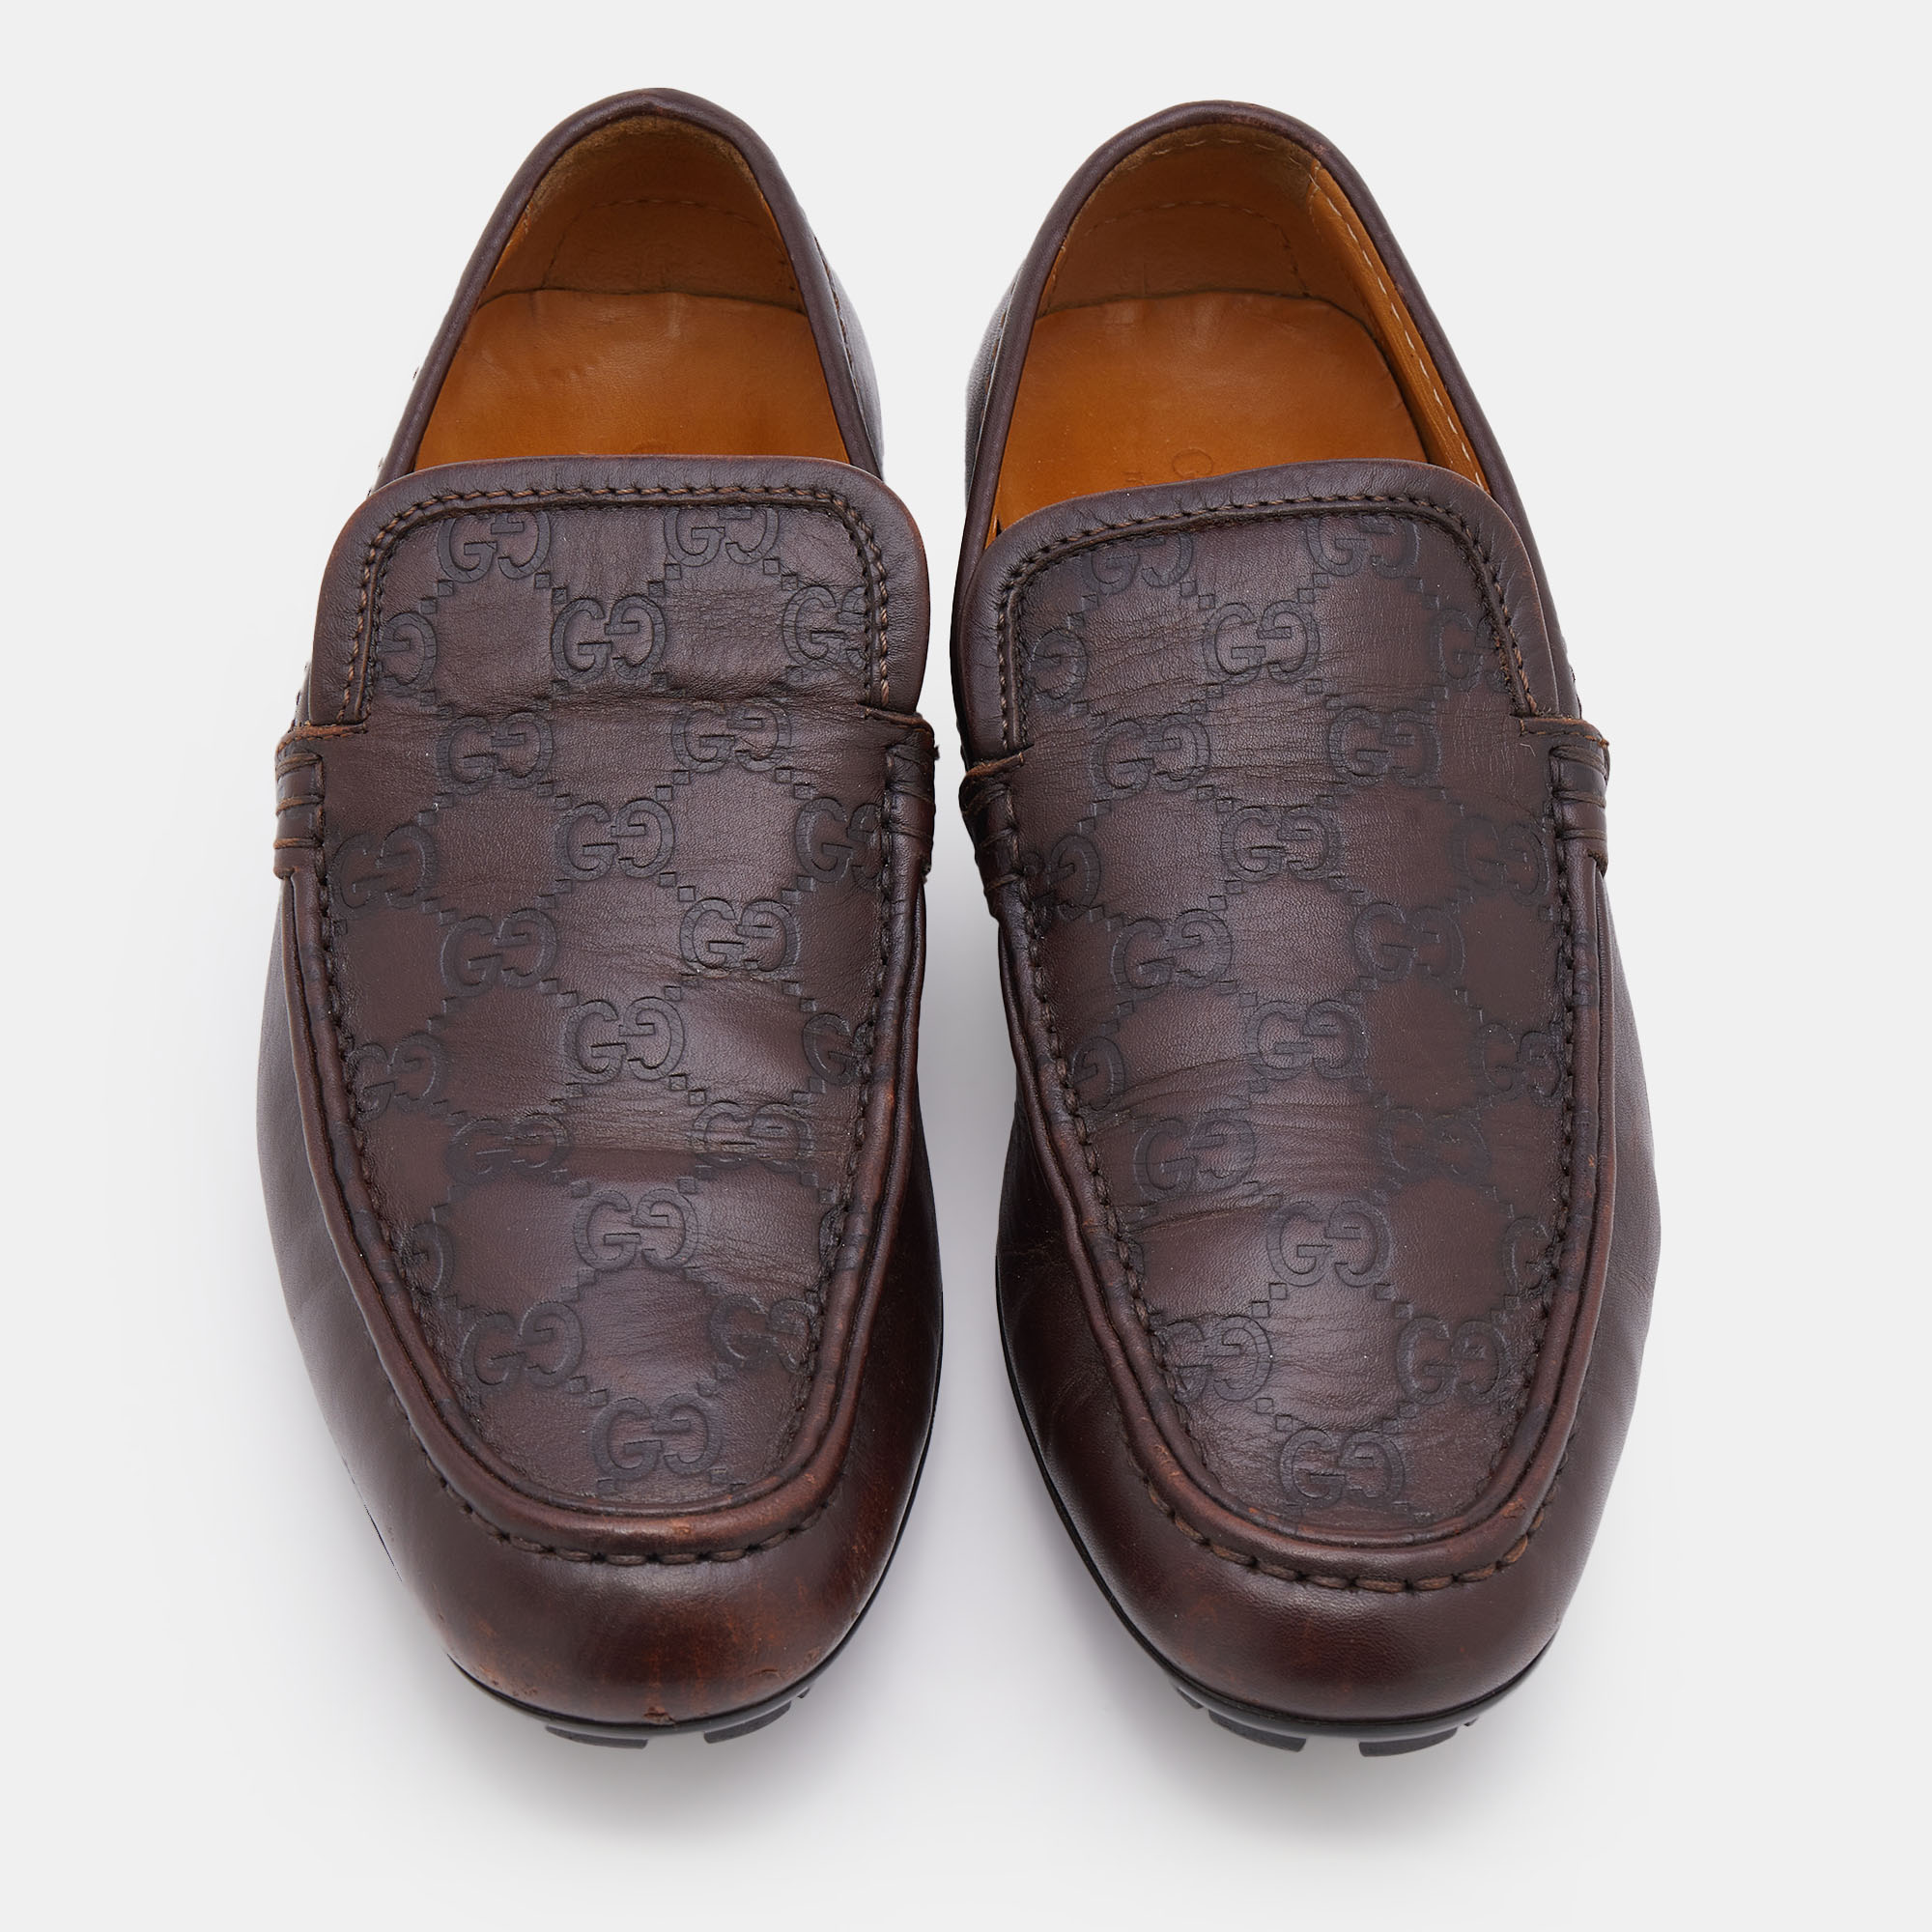 Gucci Brown Guccissima Leather Slip On Loafers Size 39